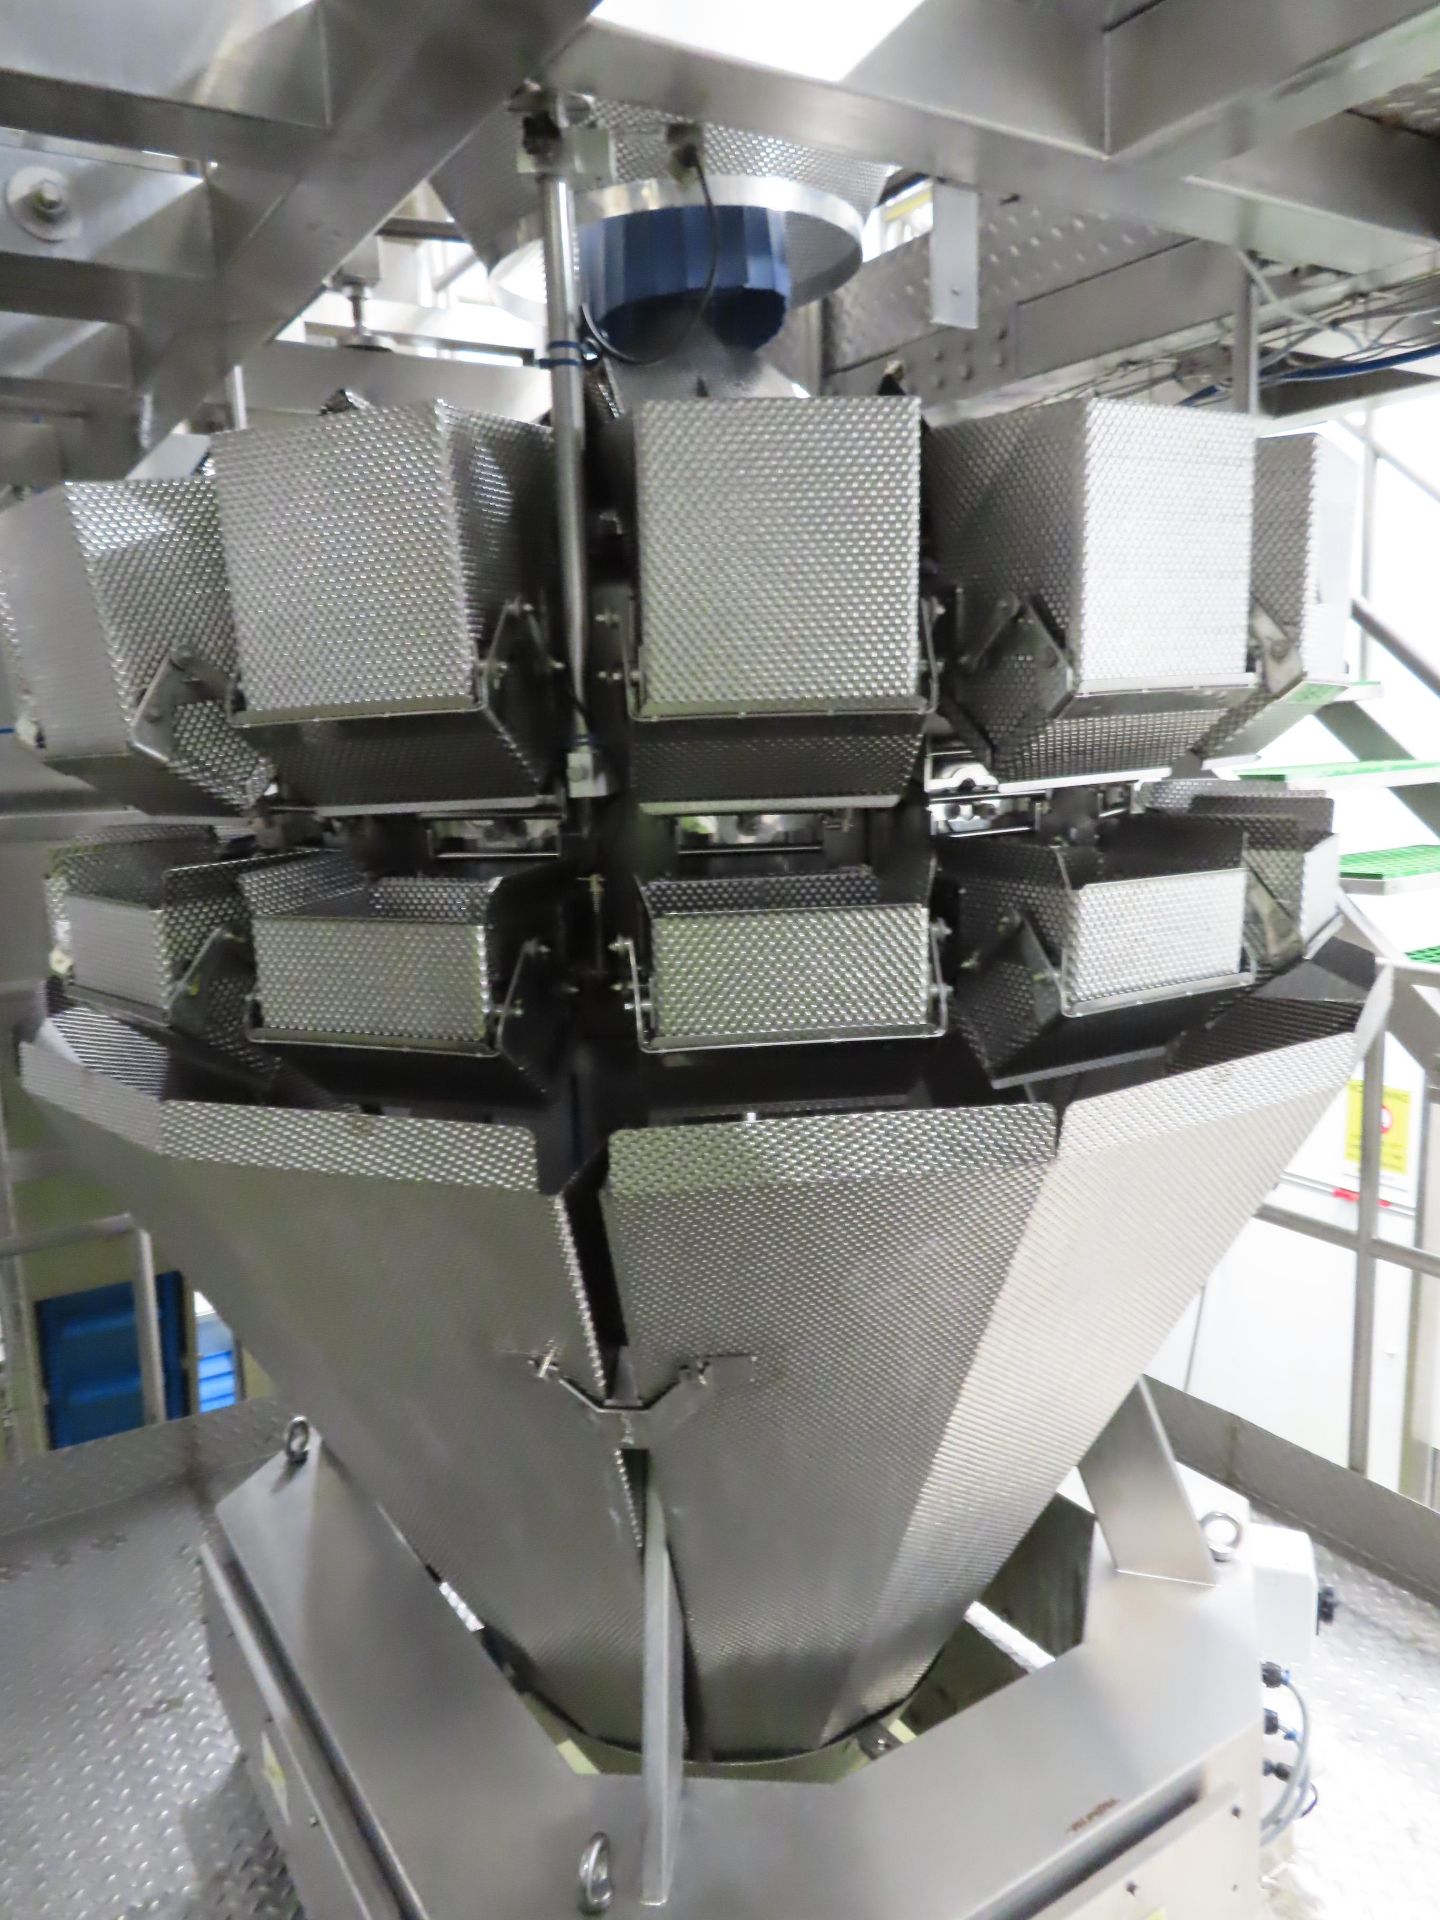 MULTIHEAD WEIGHER. 20-HEAD. YEAR 2018 - Image 4 of 6